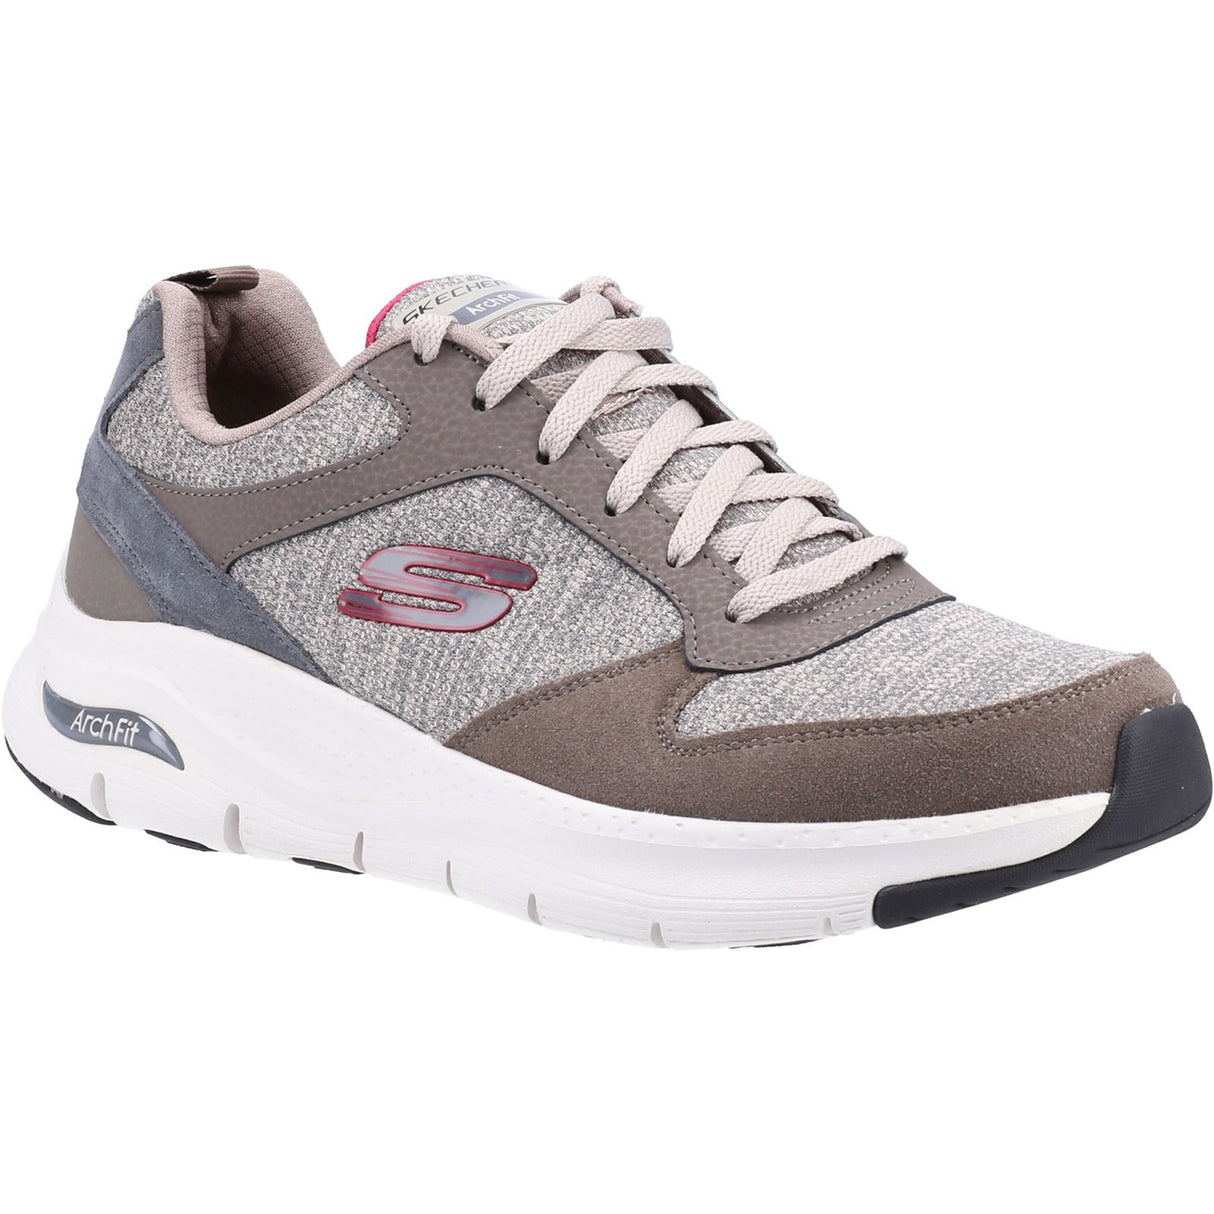 Skechers Arch Fit Trainer